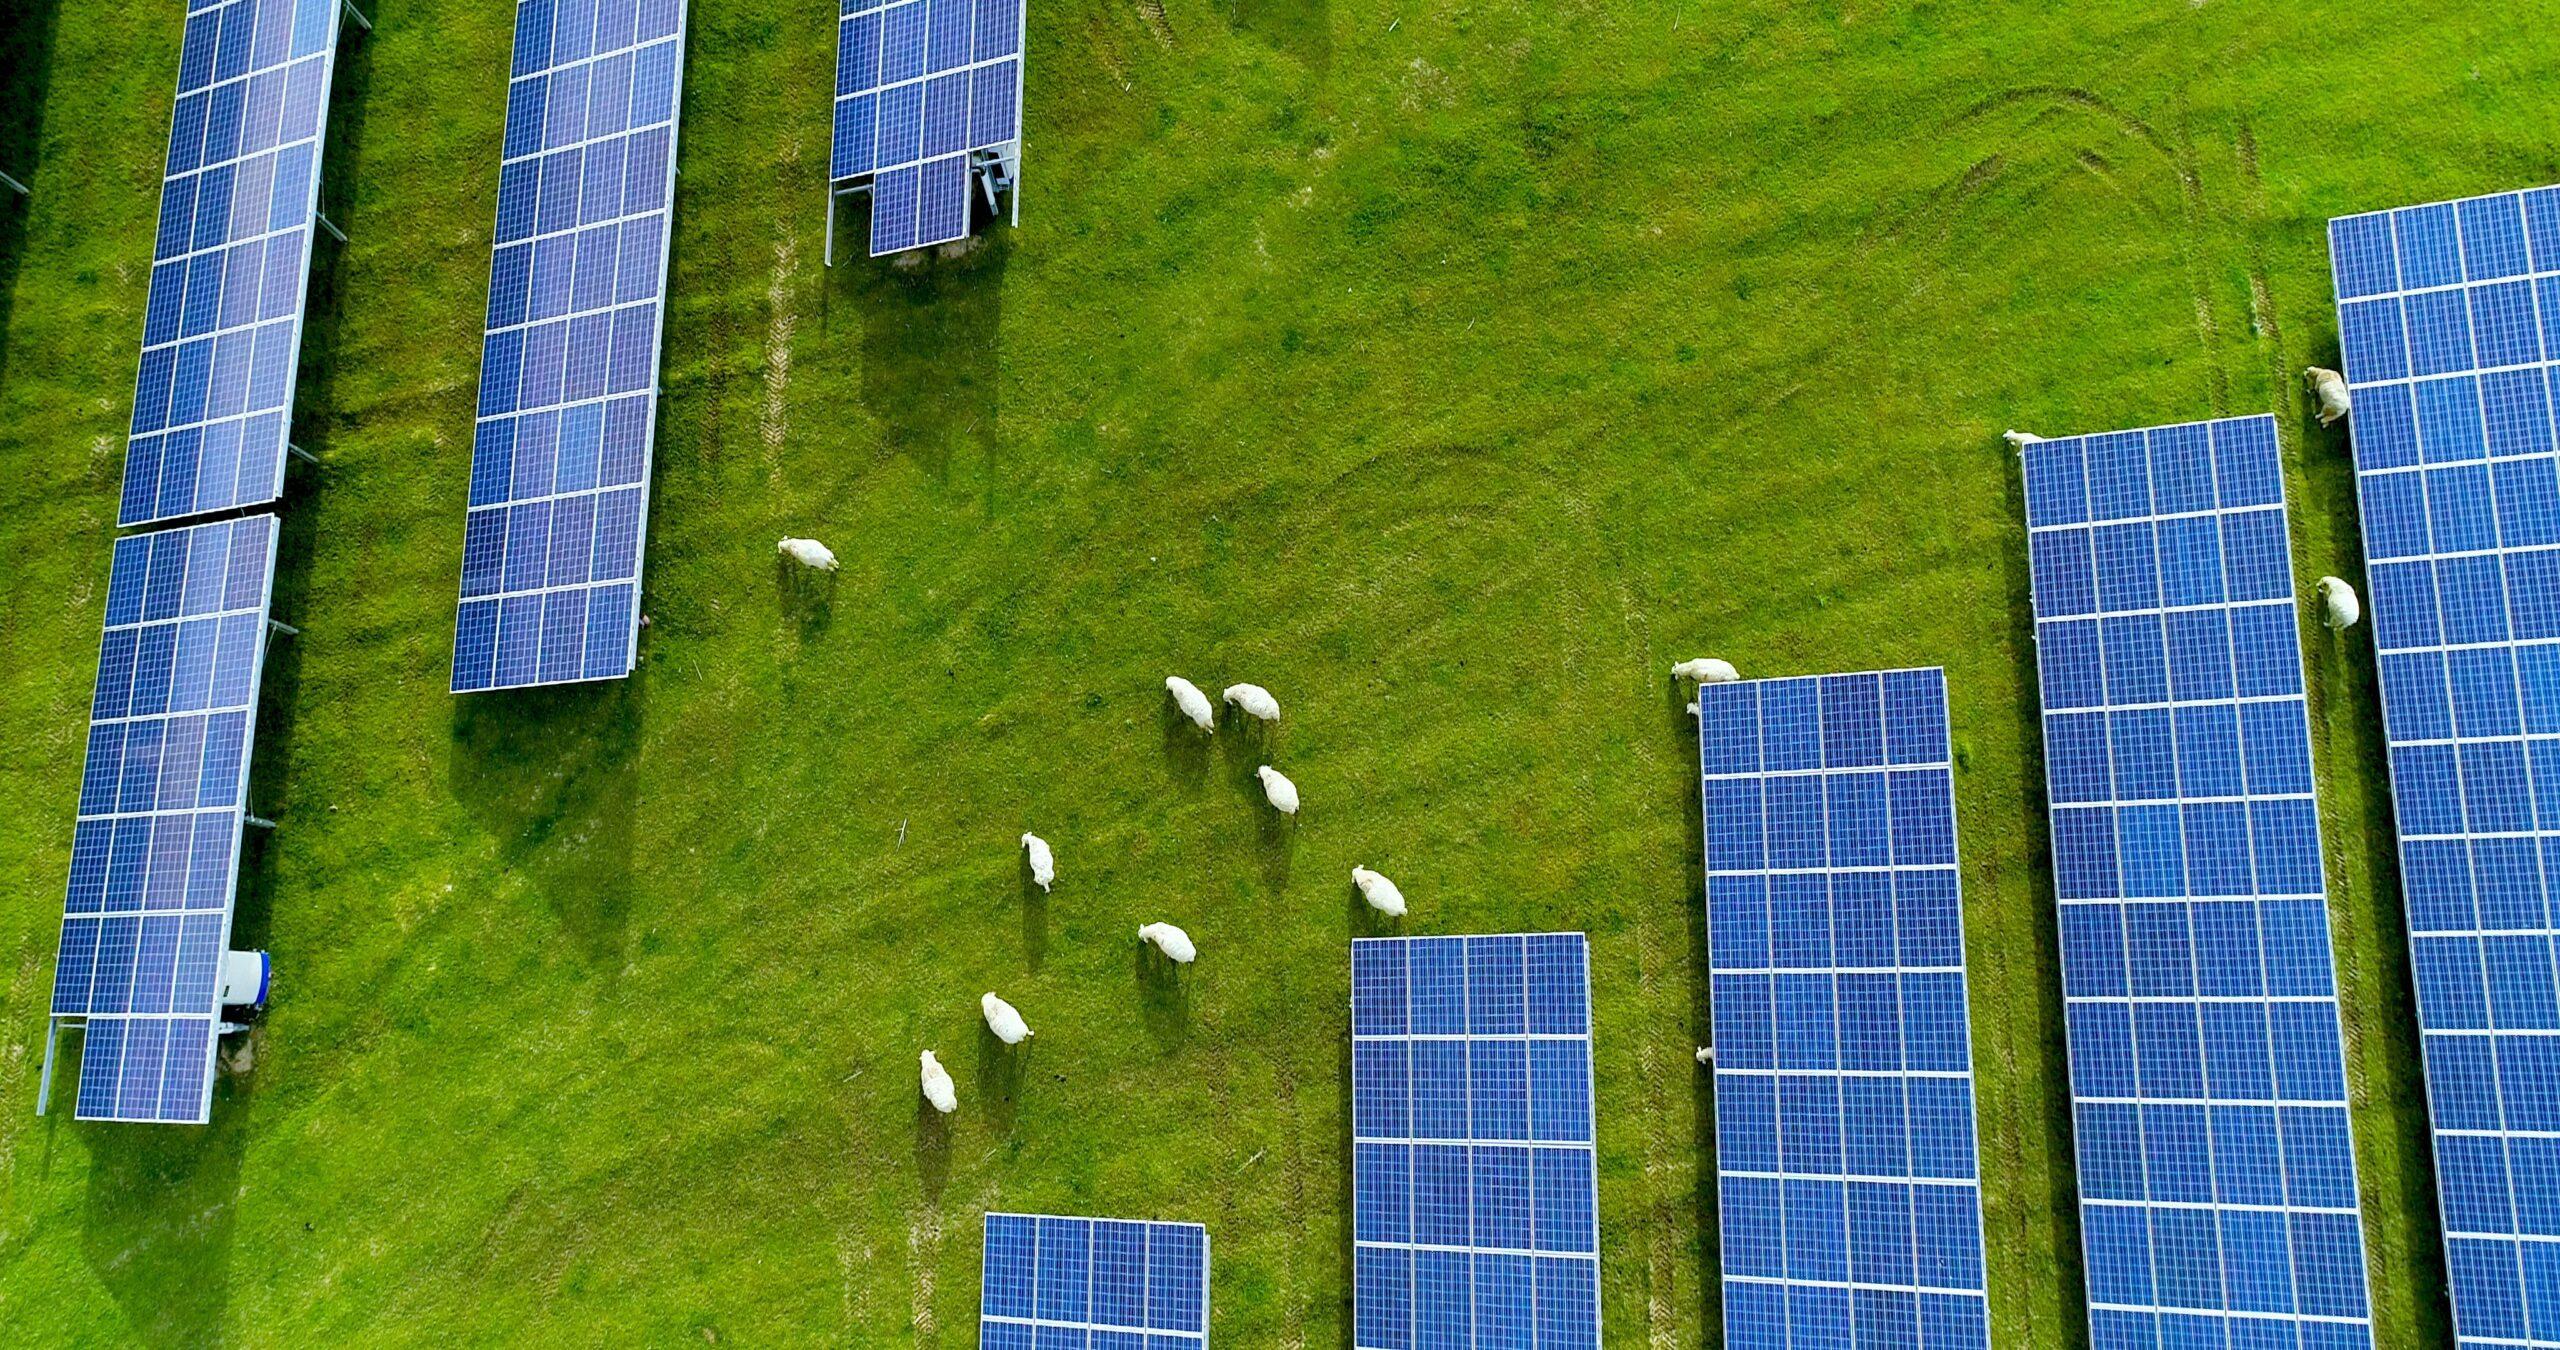 Solar panels from above, with sheep grazing